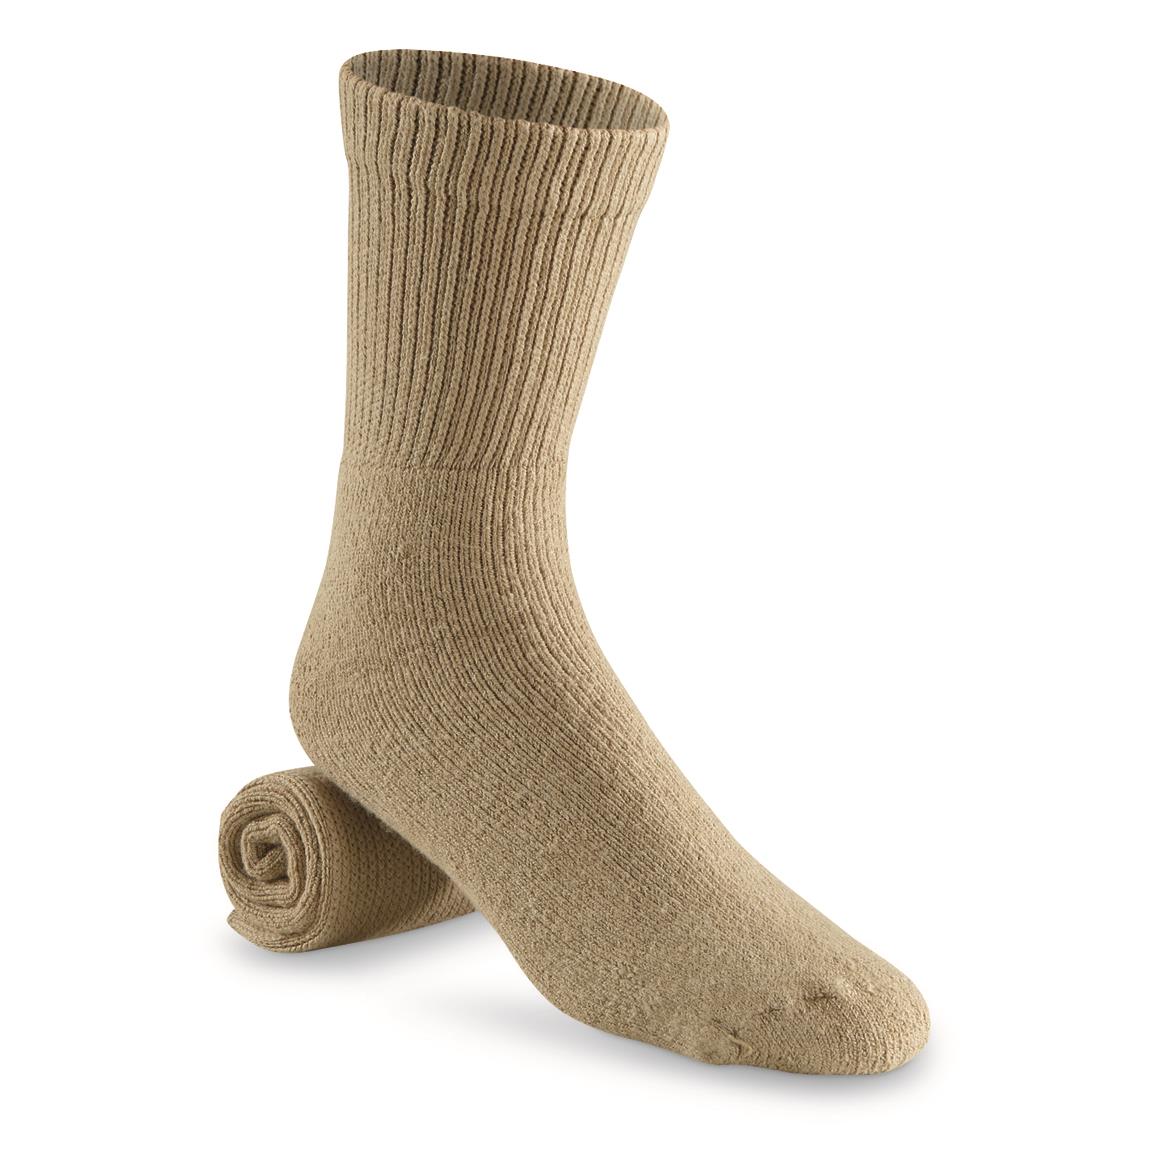 U.S. Military Surplus Fortiflame Cold Weather Socks, 2-Pack, New, Sand